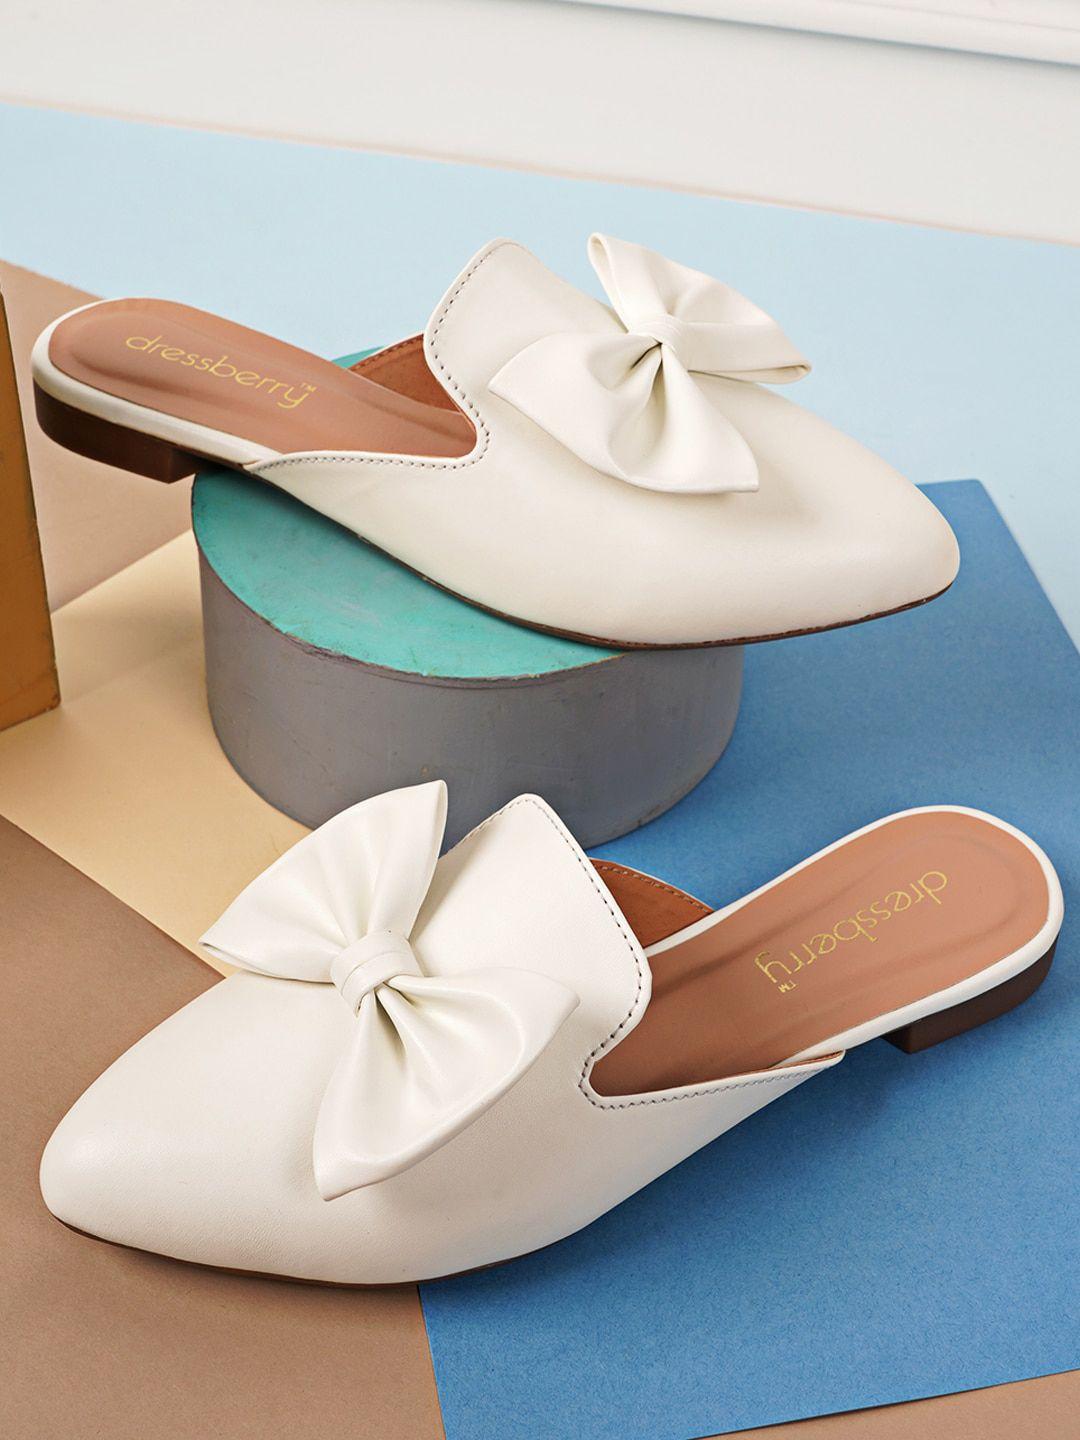 dressberry women white ballerinas with bows flats